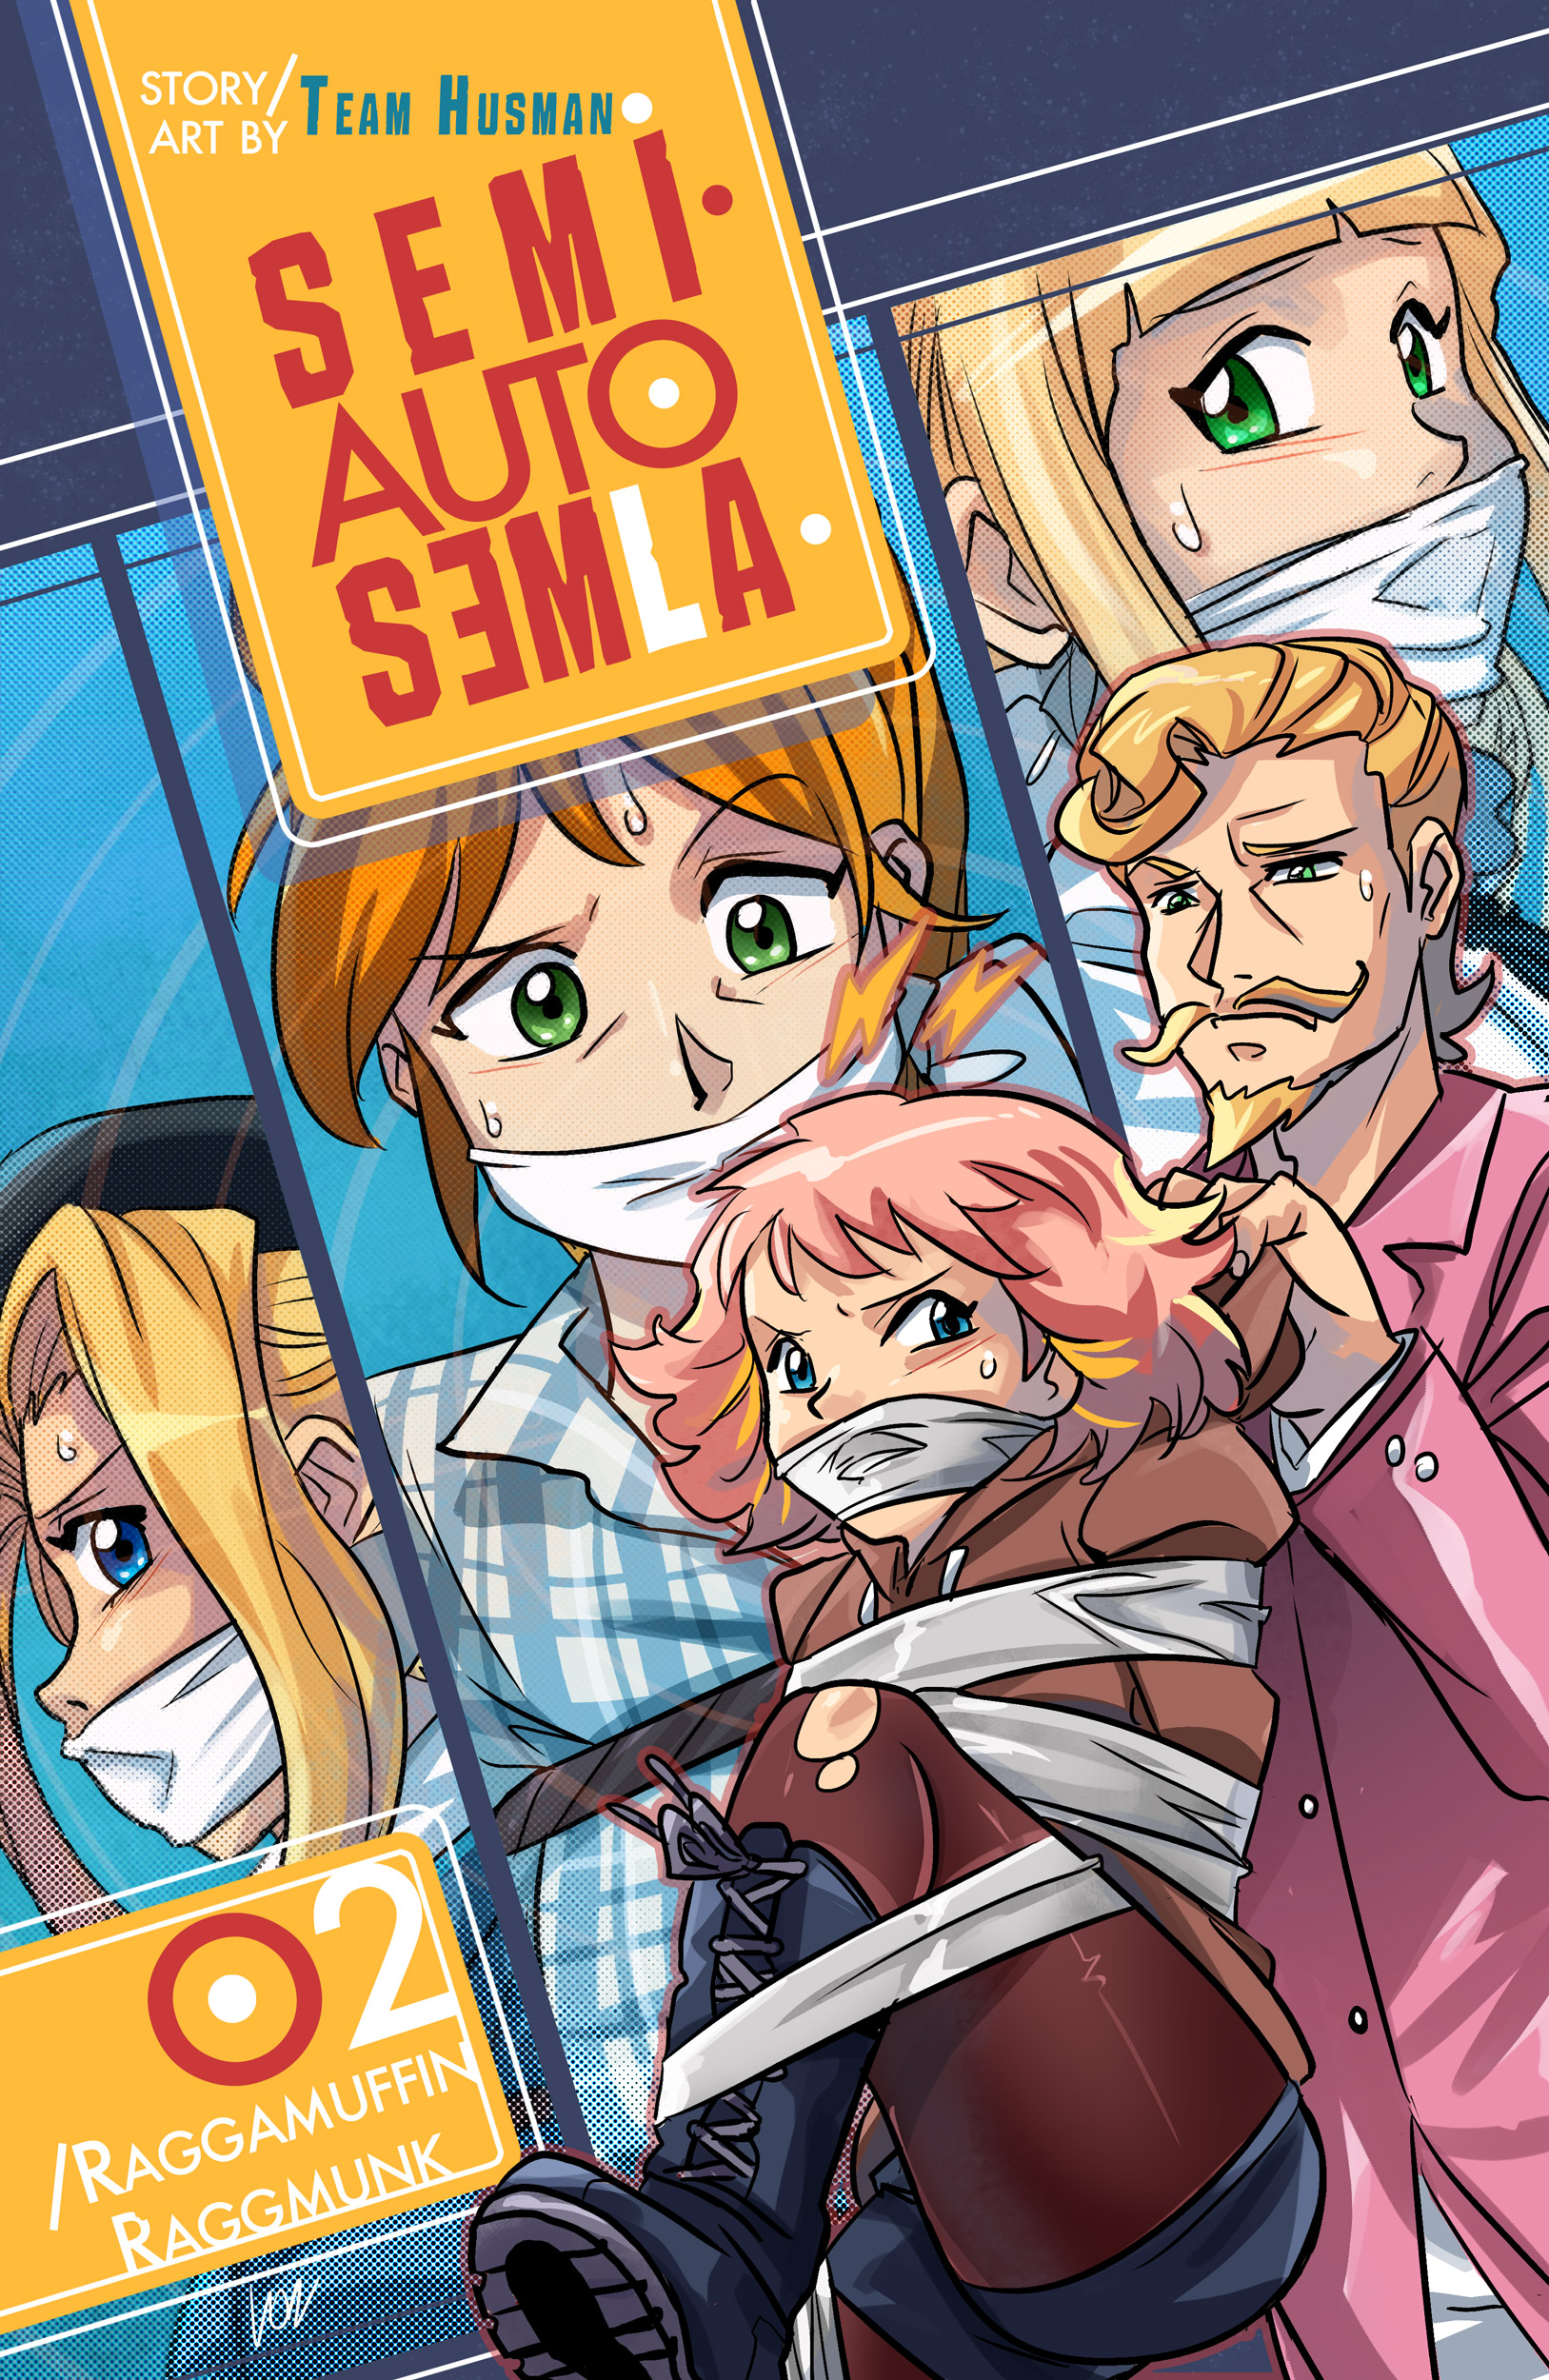 Chapter 2 Cover